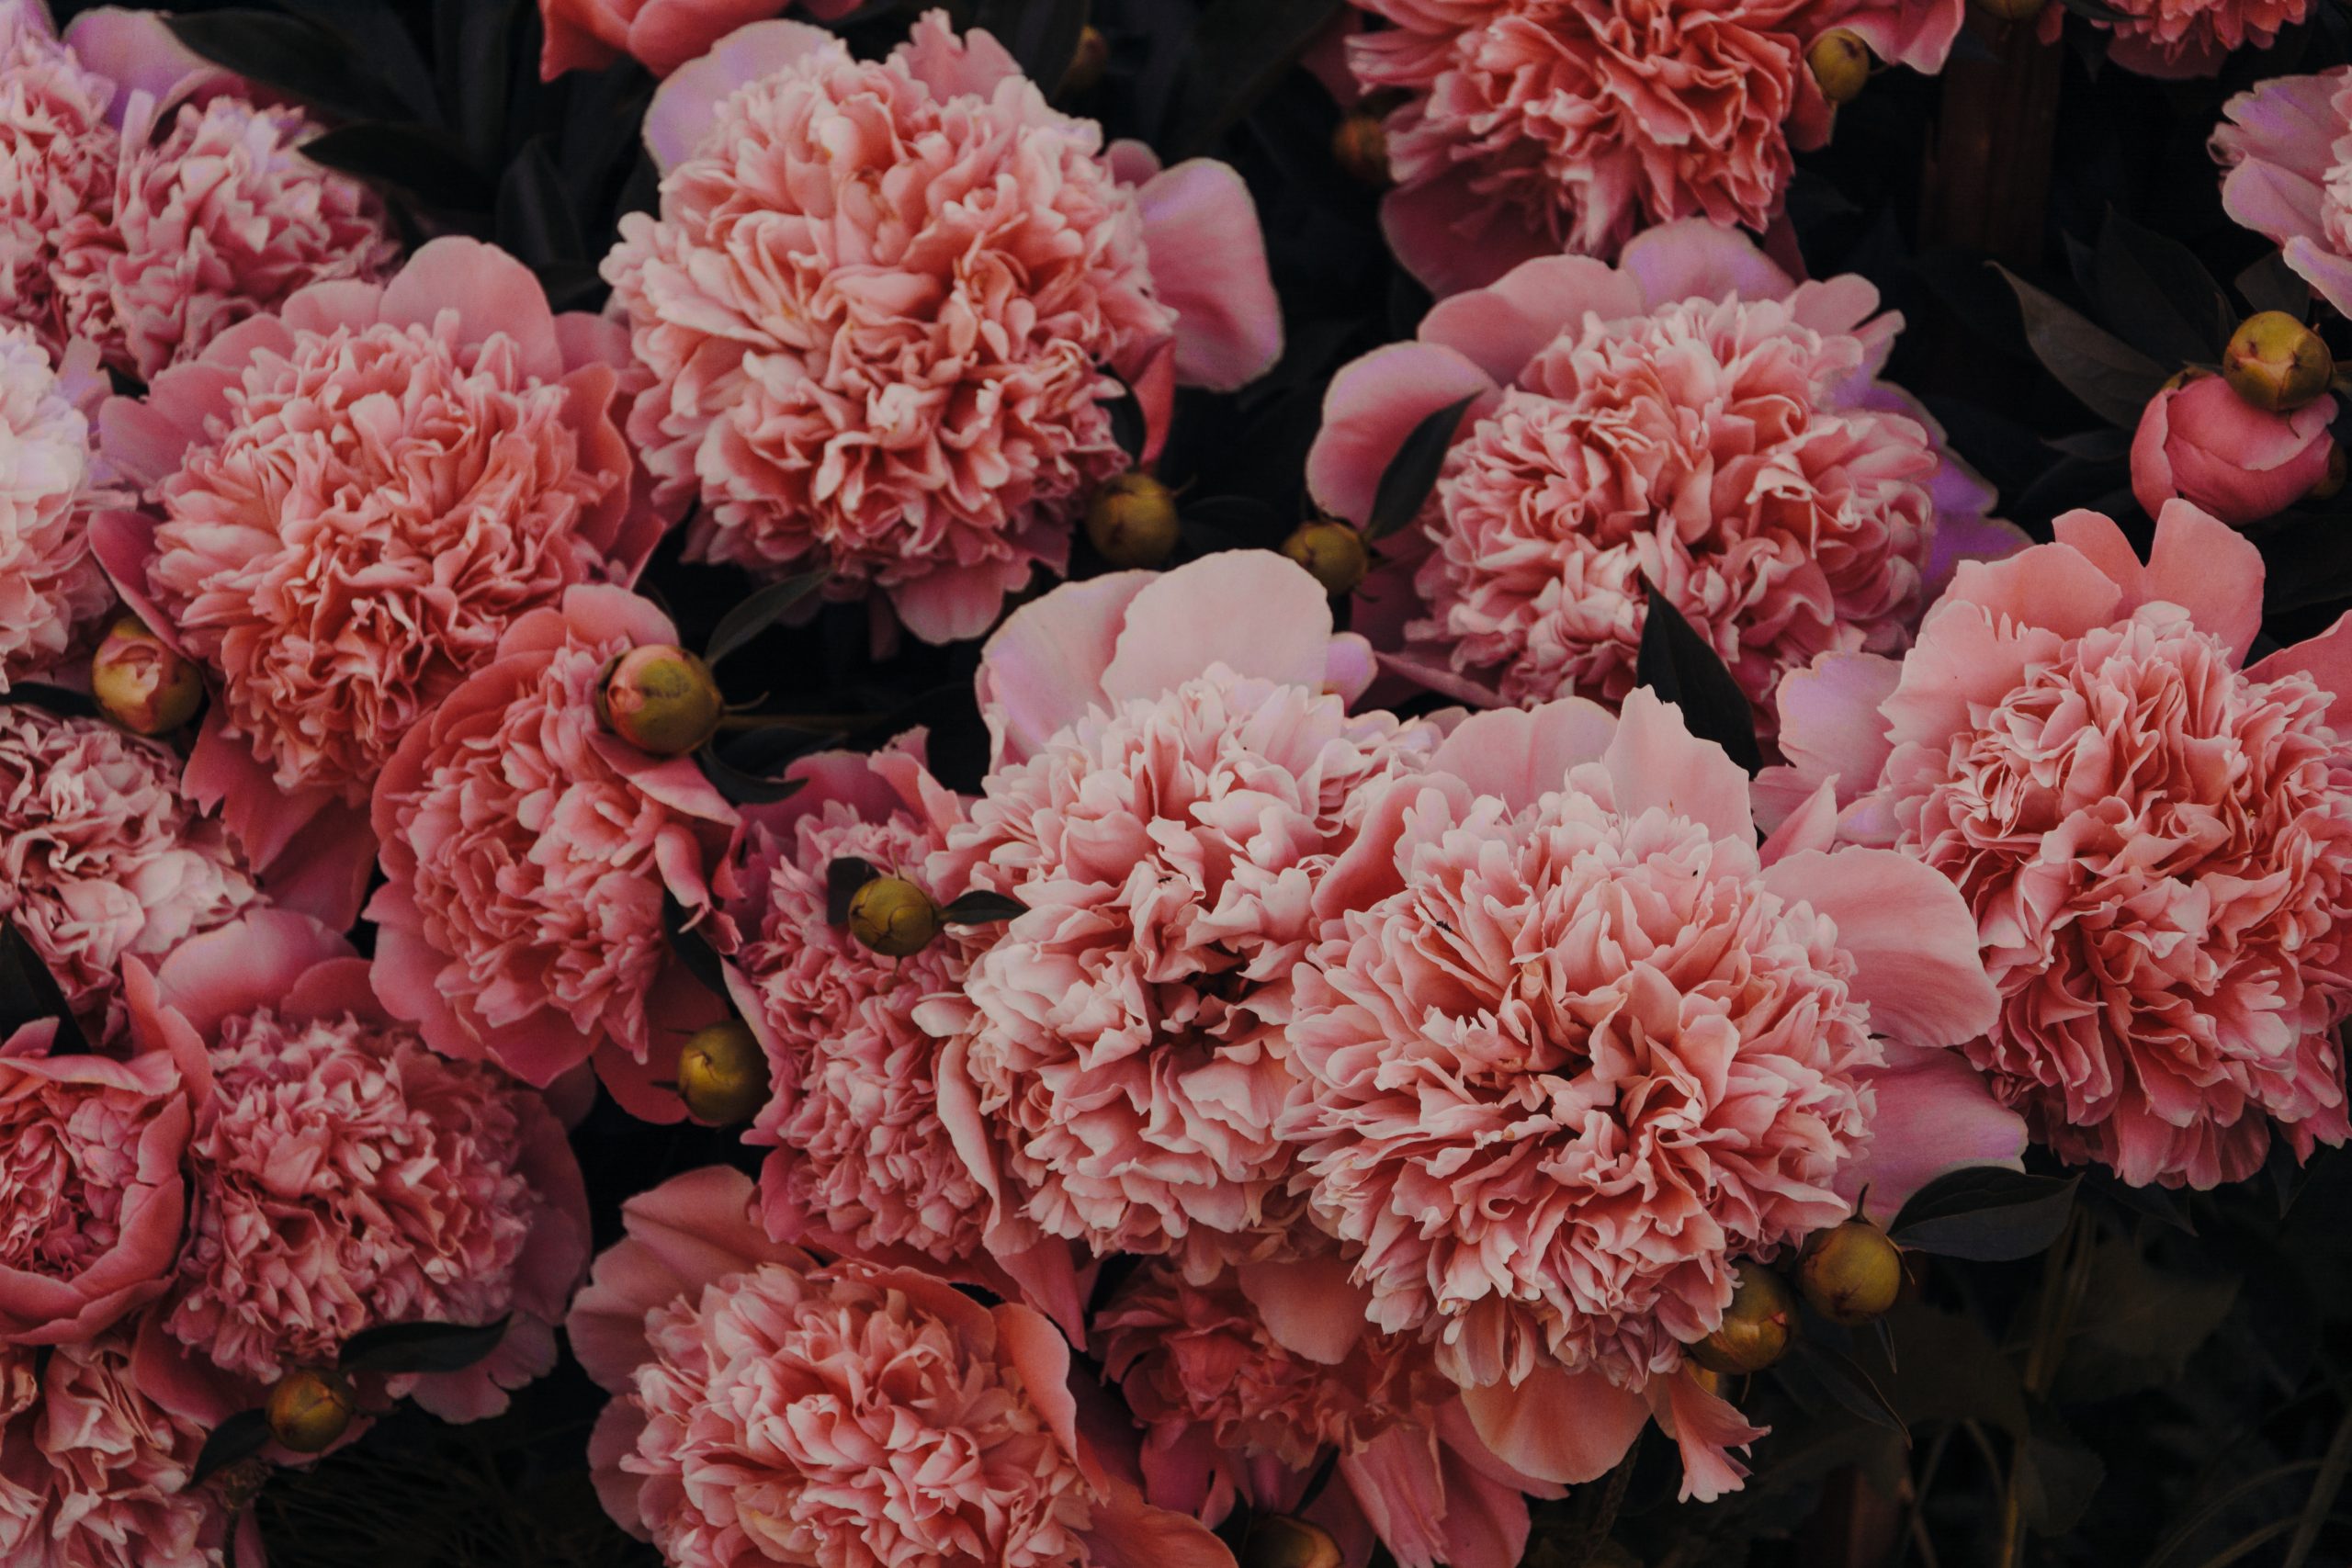 A cluster of carnations growing in a garden.